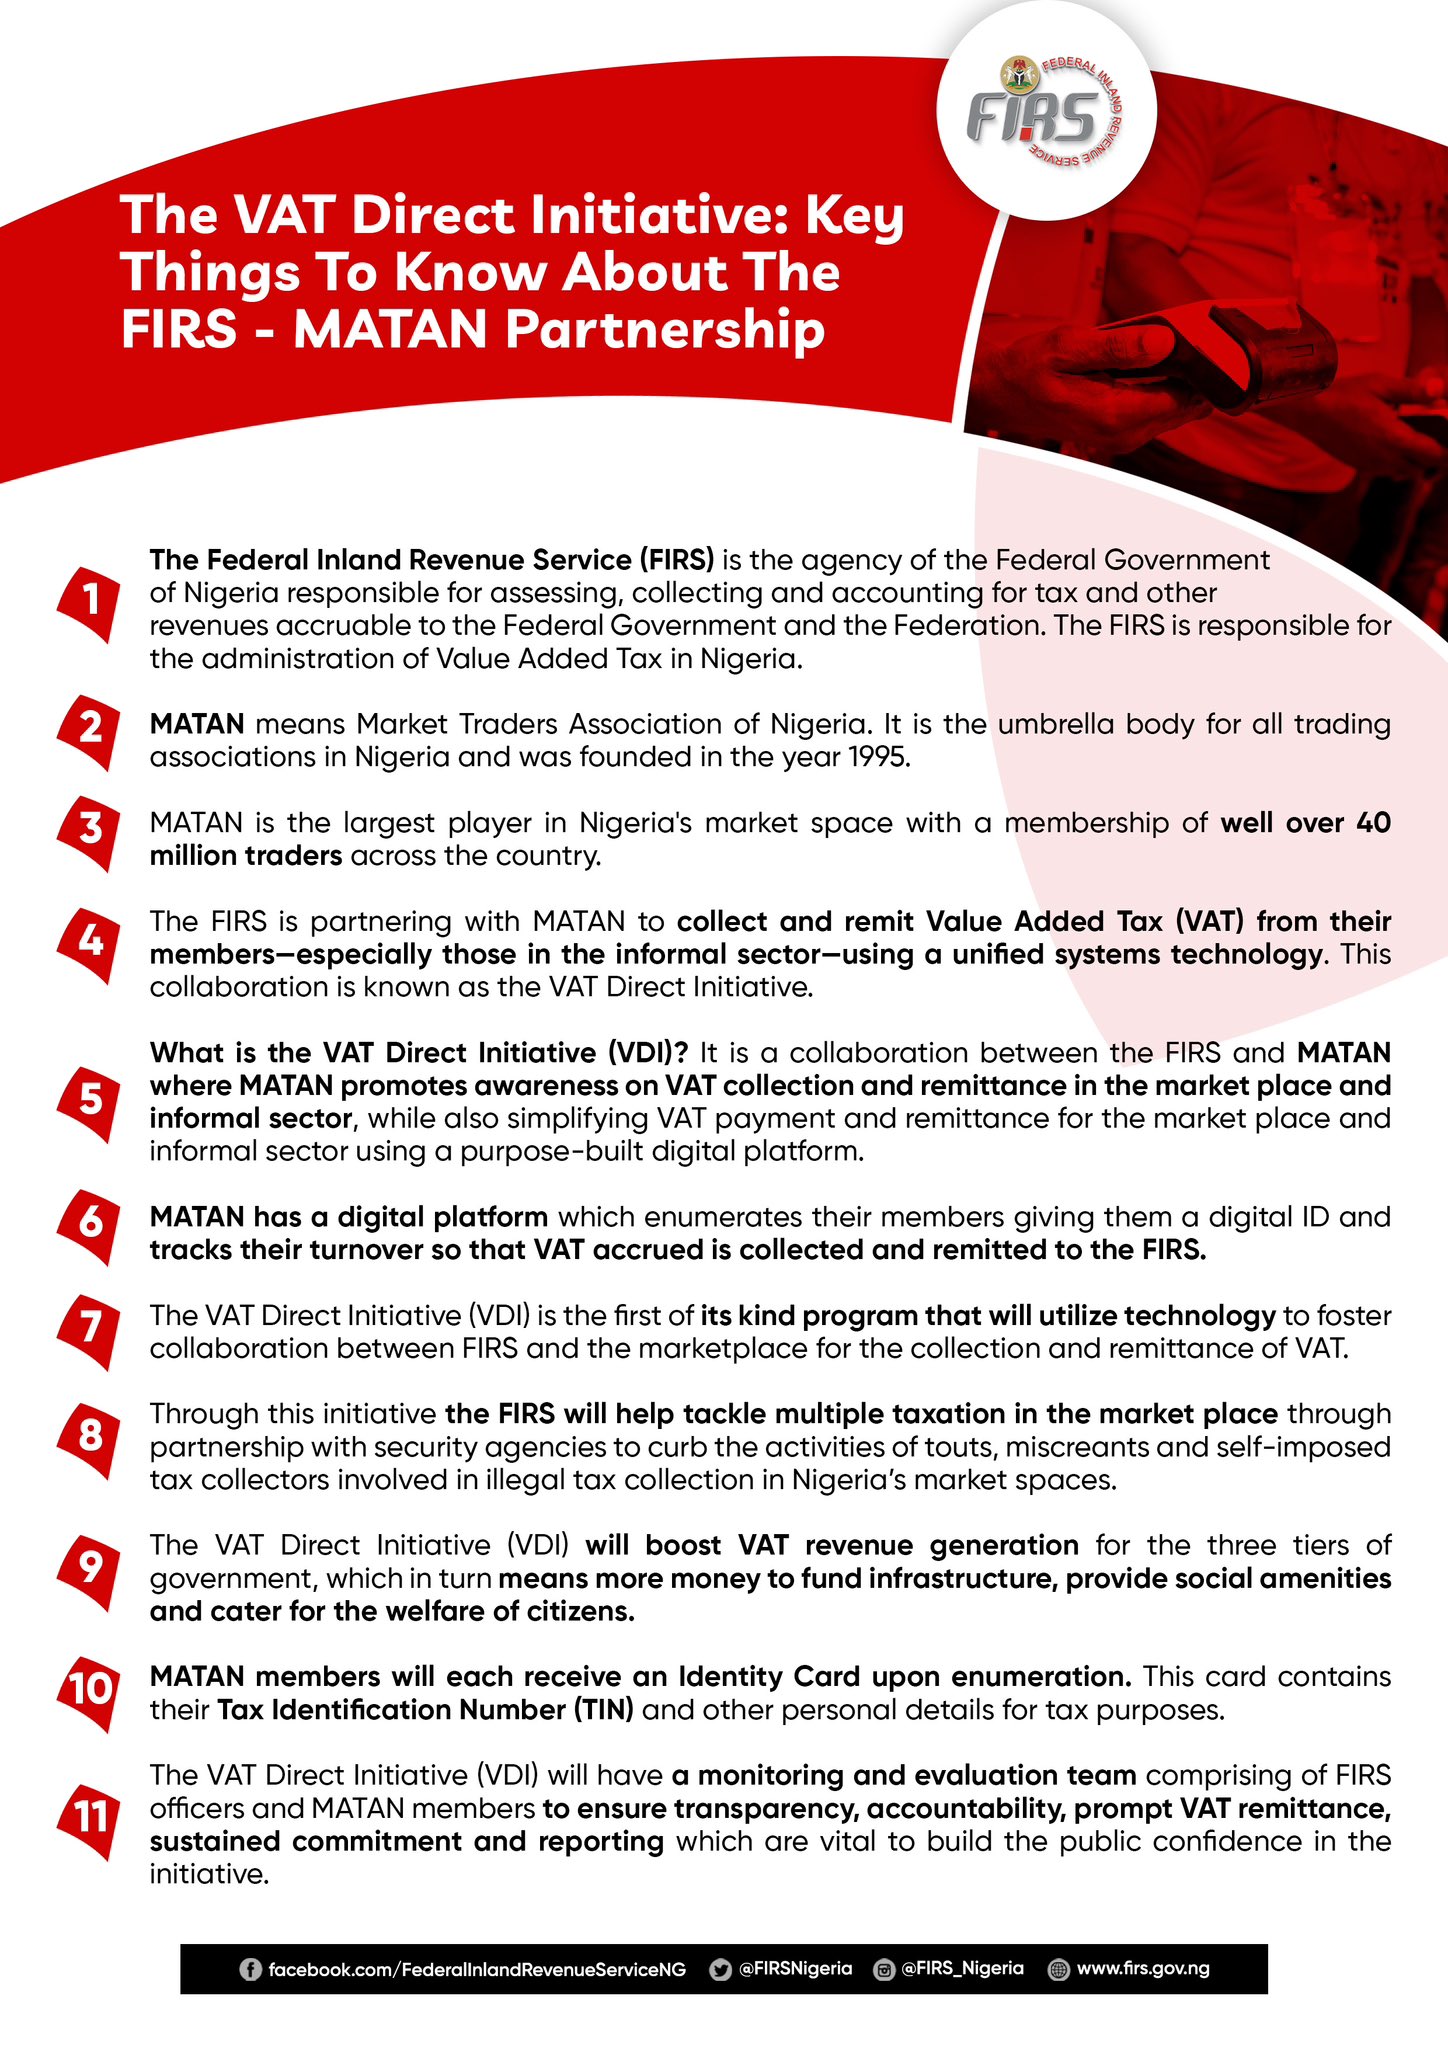 VAT Direct Initiative: Key Things To Know About The FIRS - MATAN Partnership